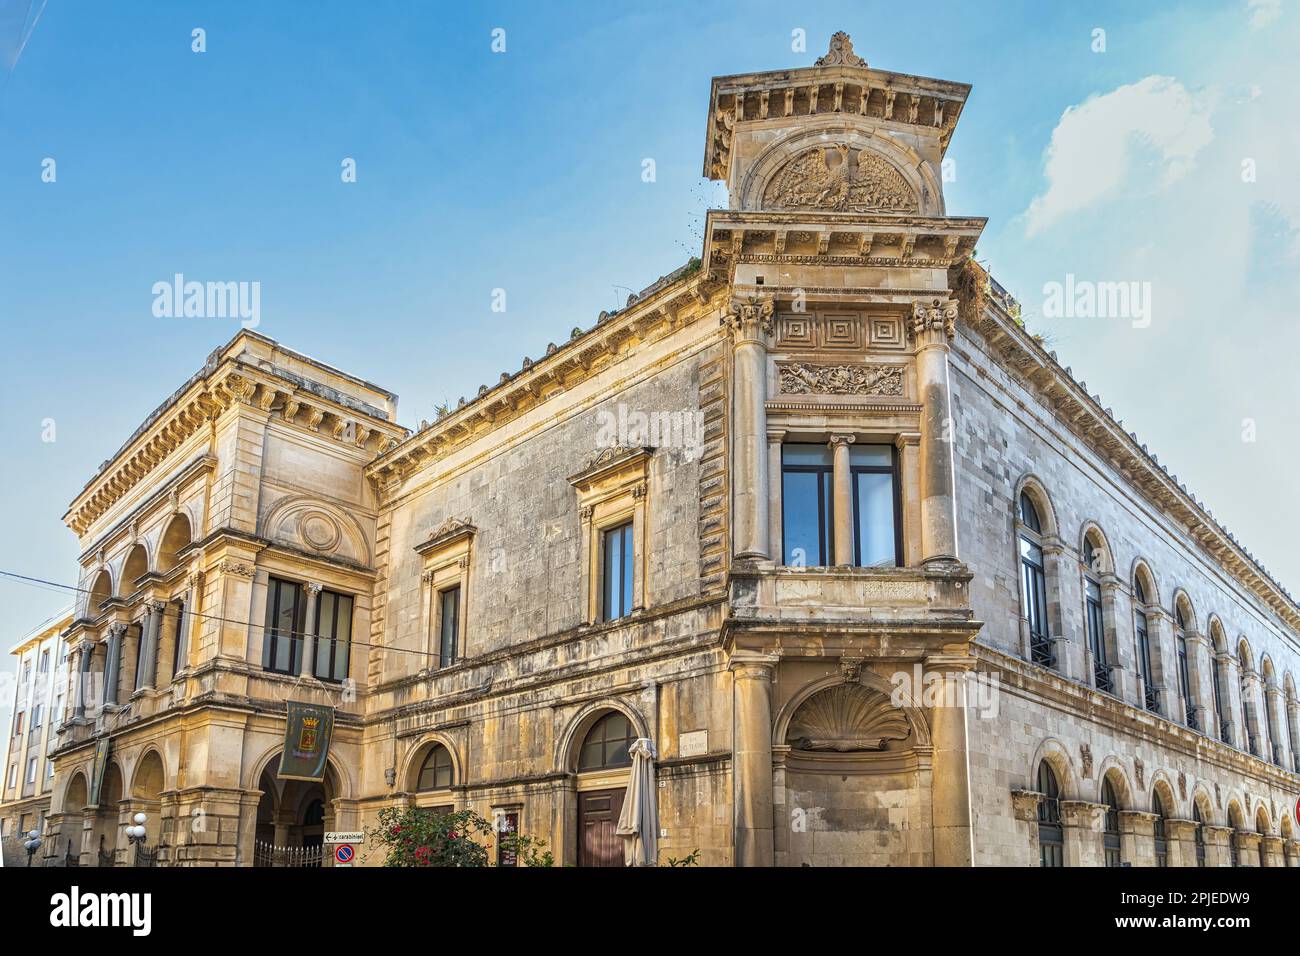 The architecture of the Syracuse municipal theater is made up of different architectural styles from the neo-Renaissance to the neo-classical. Sicily Stock Photo